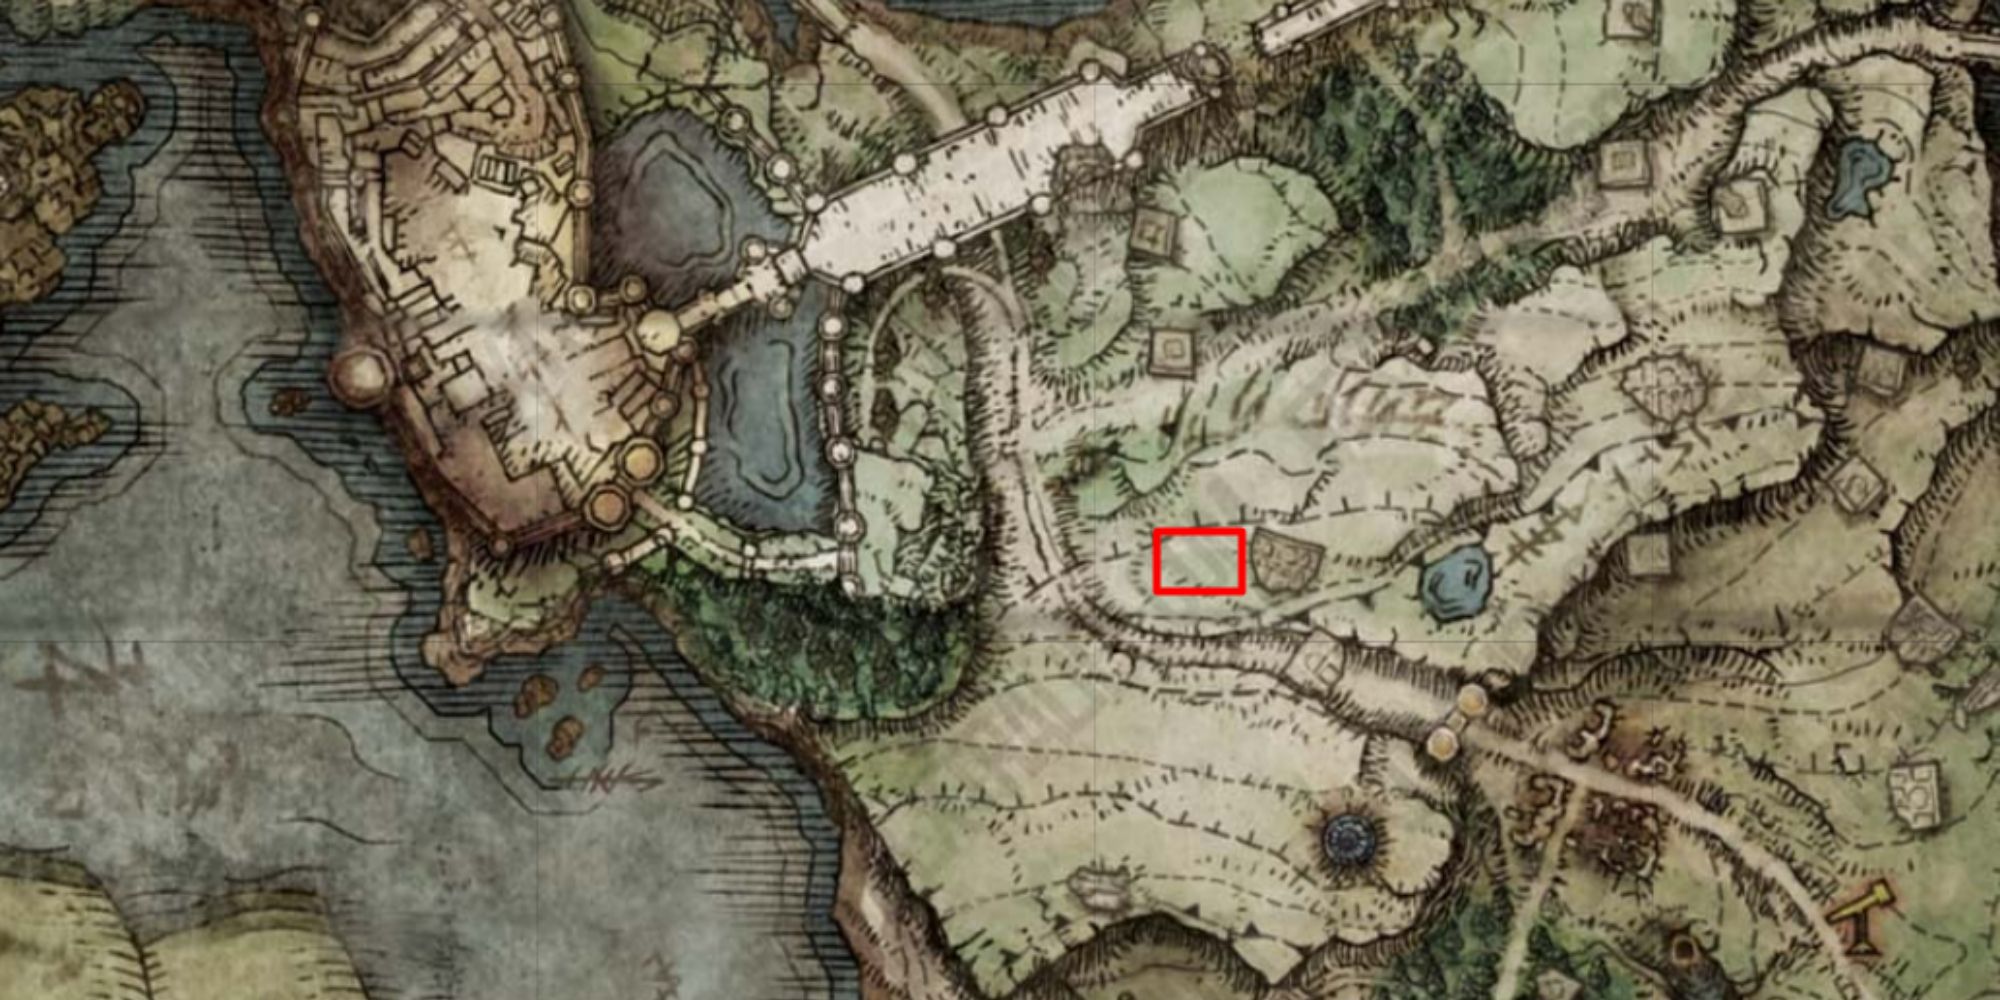 Stormhill marked on Elden Ring's map